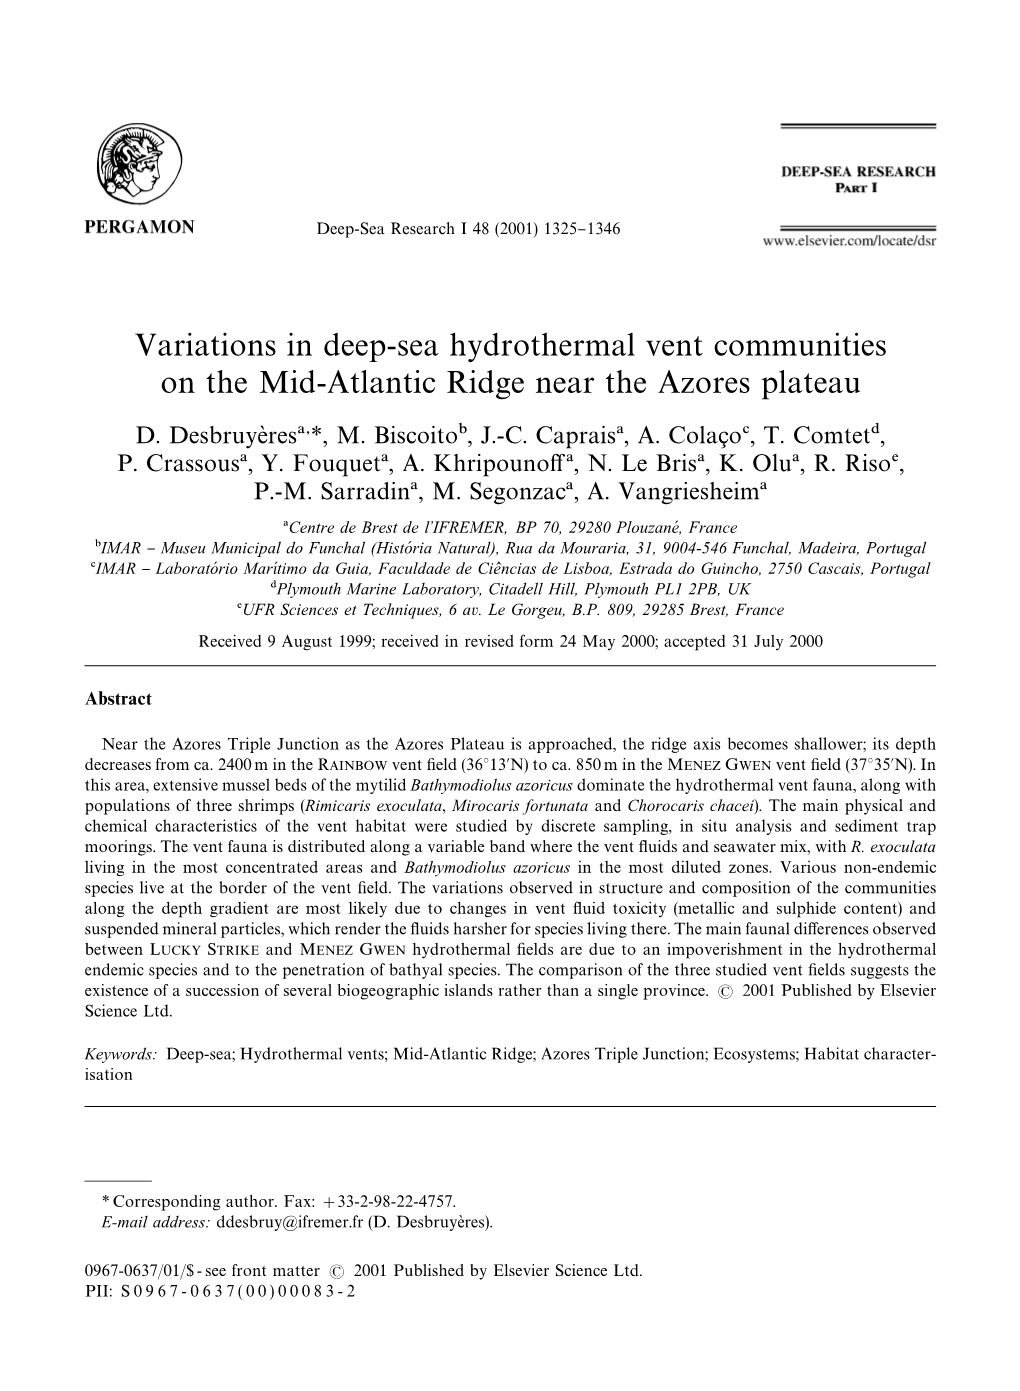 Variations in Deep-Sea Hydrothermal Vent Communities on the Mid-Atlantic Ridge Near the Azores Plateau